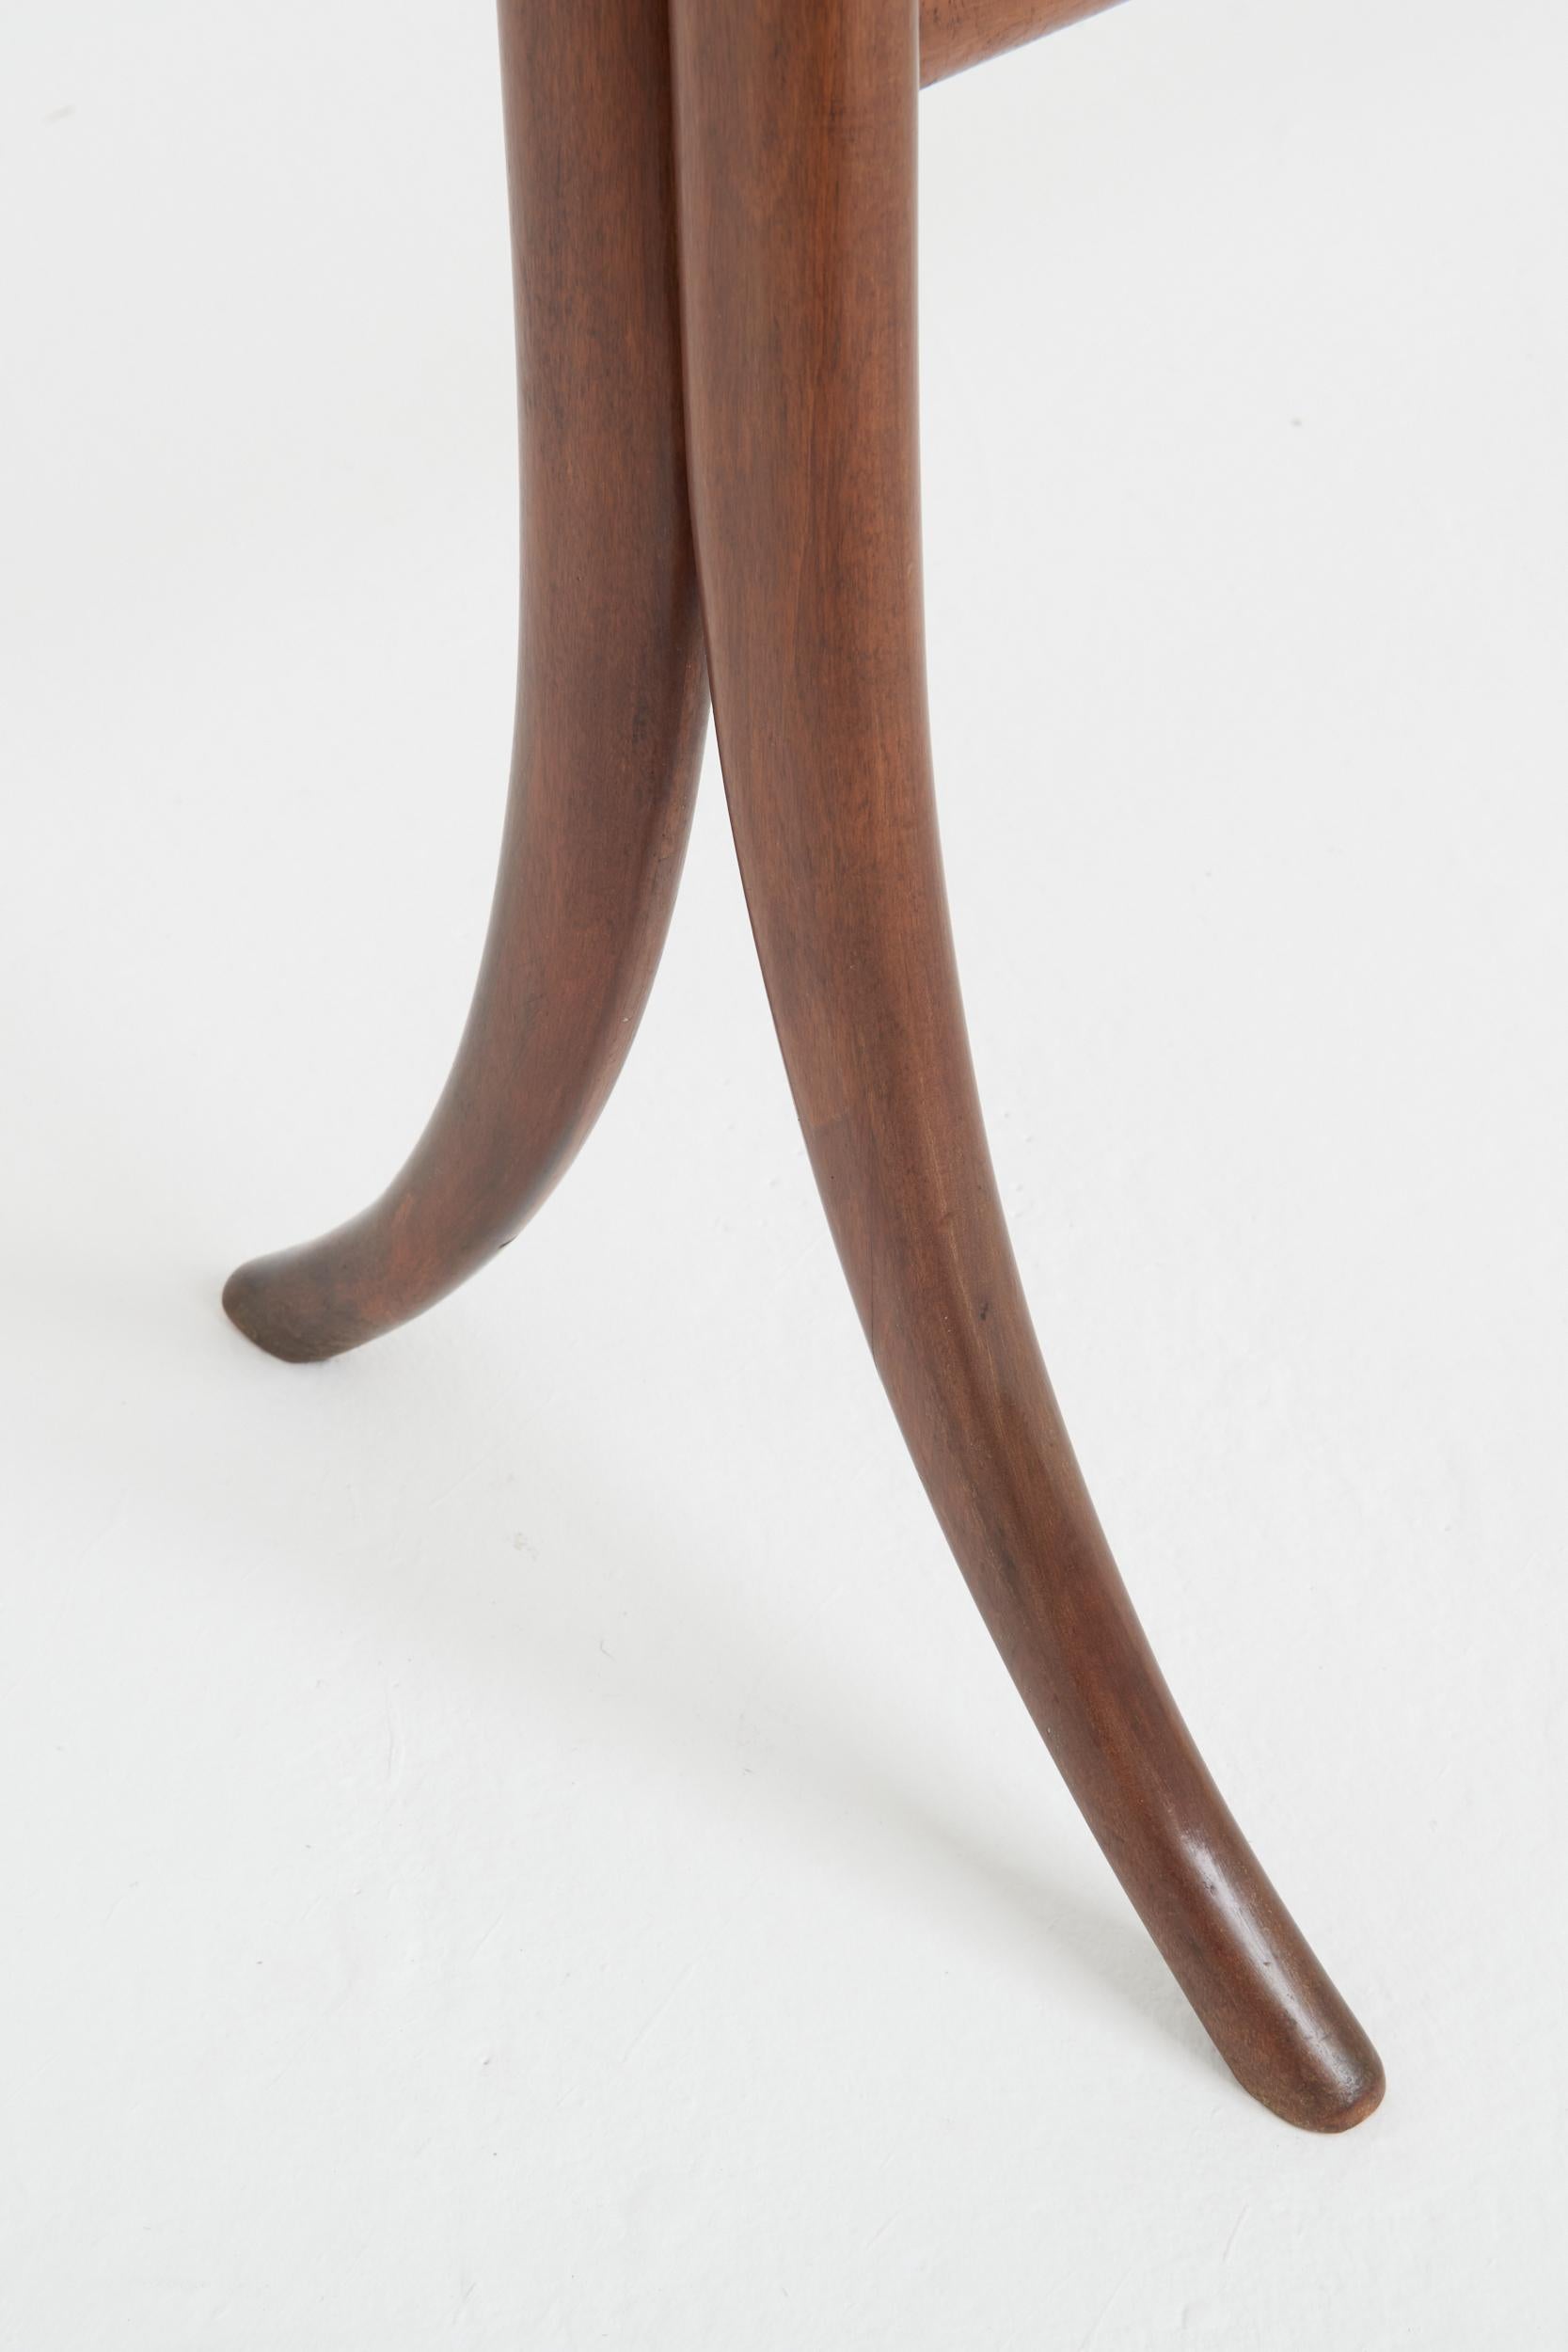 Mid-Century Mahogany Console Table For Sale 3